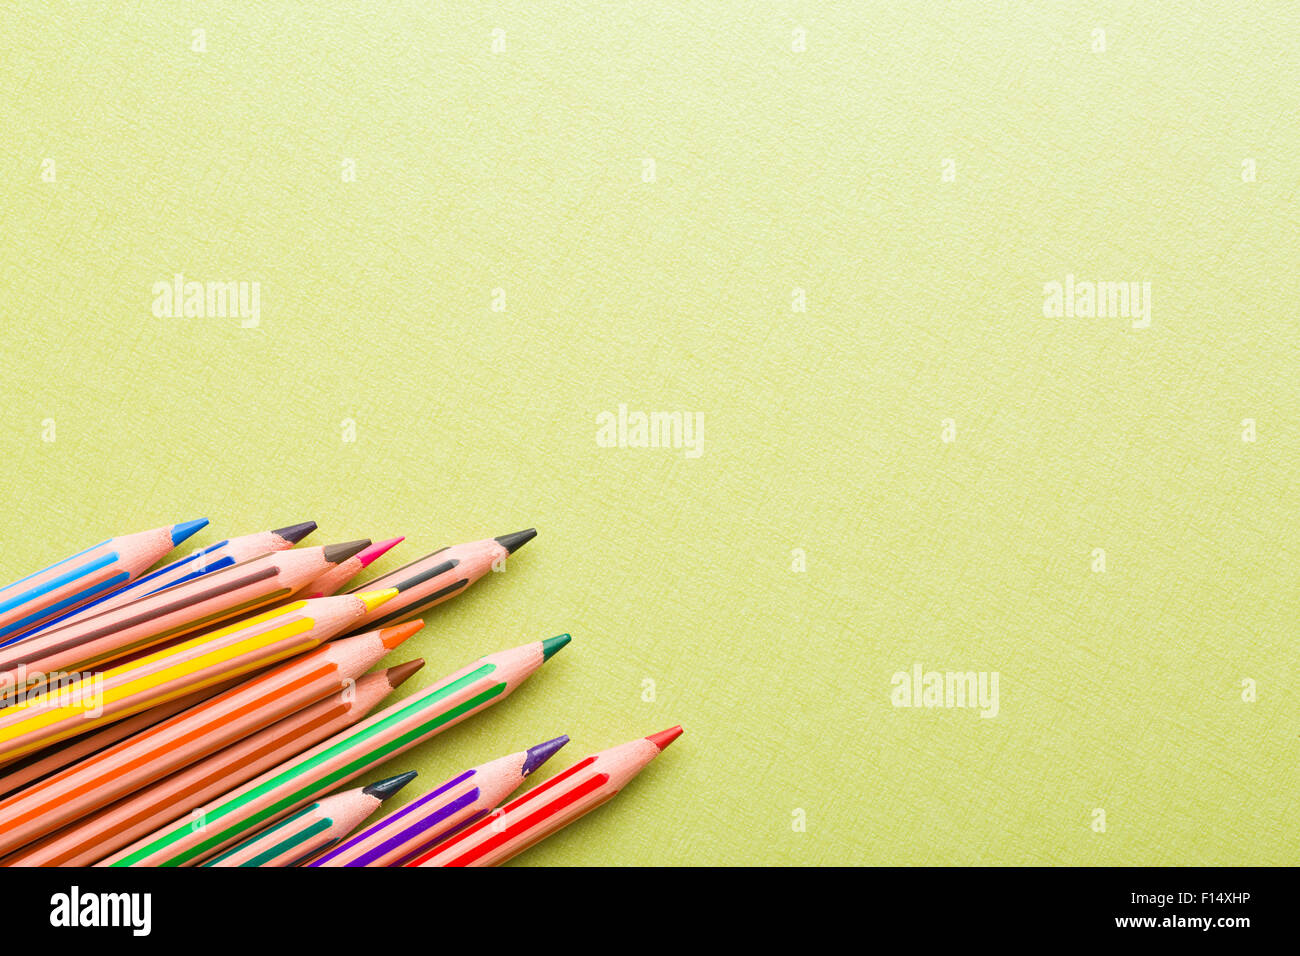 https://c8.alamy.com/comp/F14XHP/top-view-of-colour-pencils-on-table-F14XHP.jpg